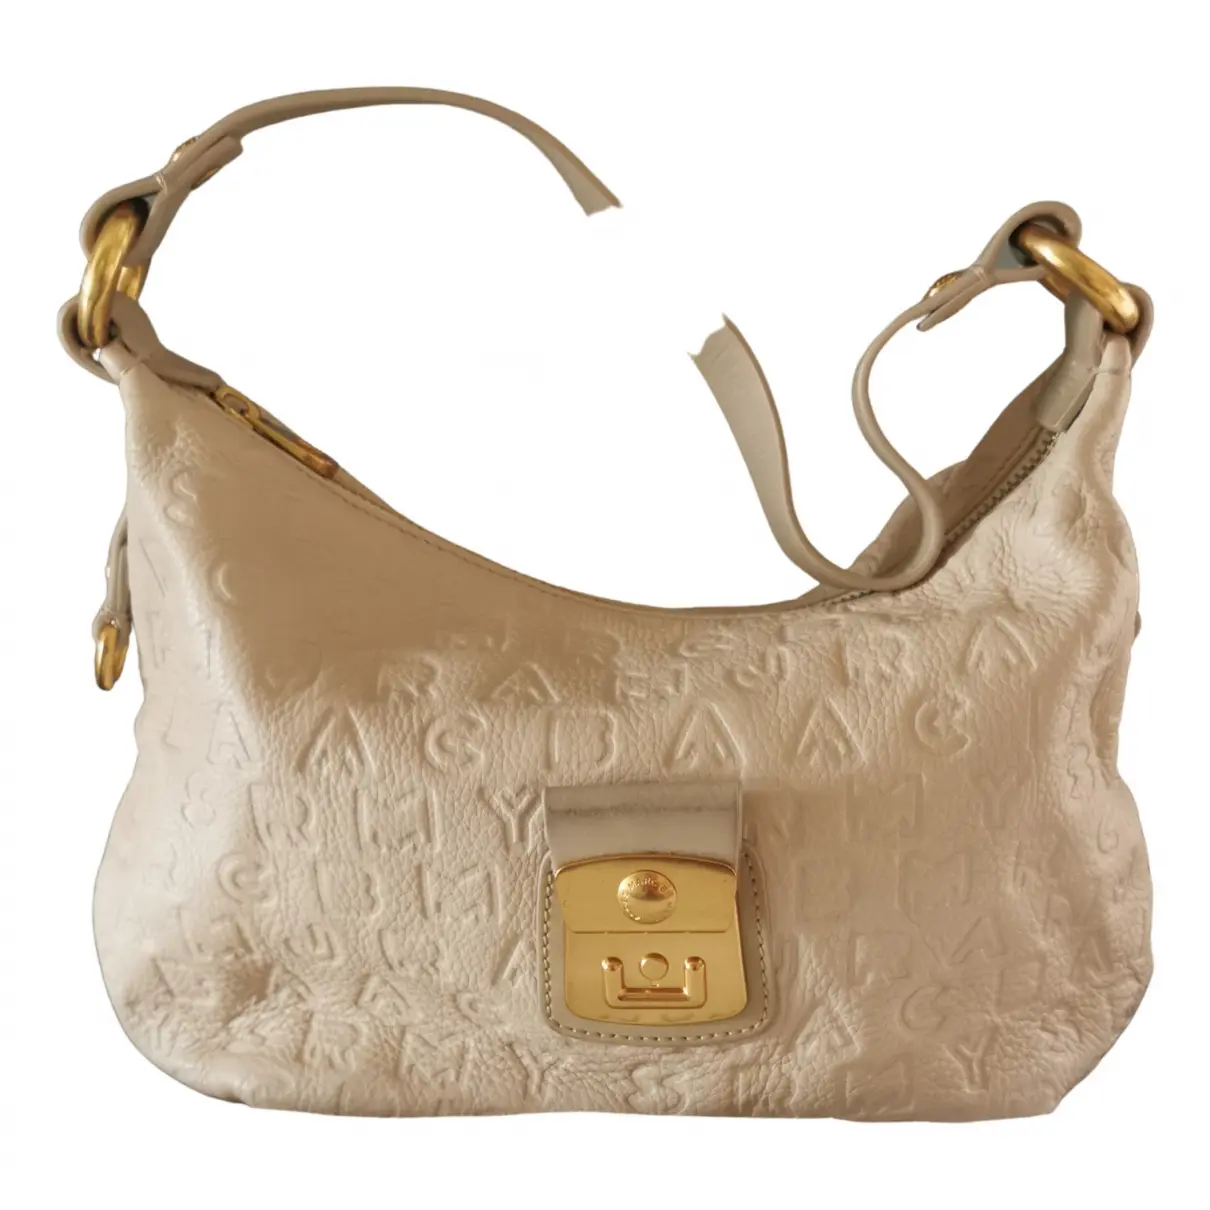 Leather bag Marc by Marc Jacobs